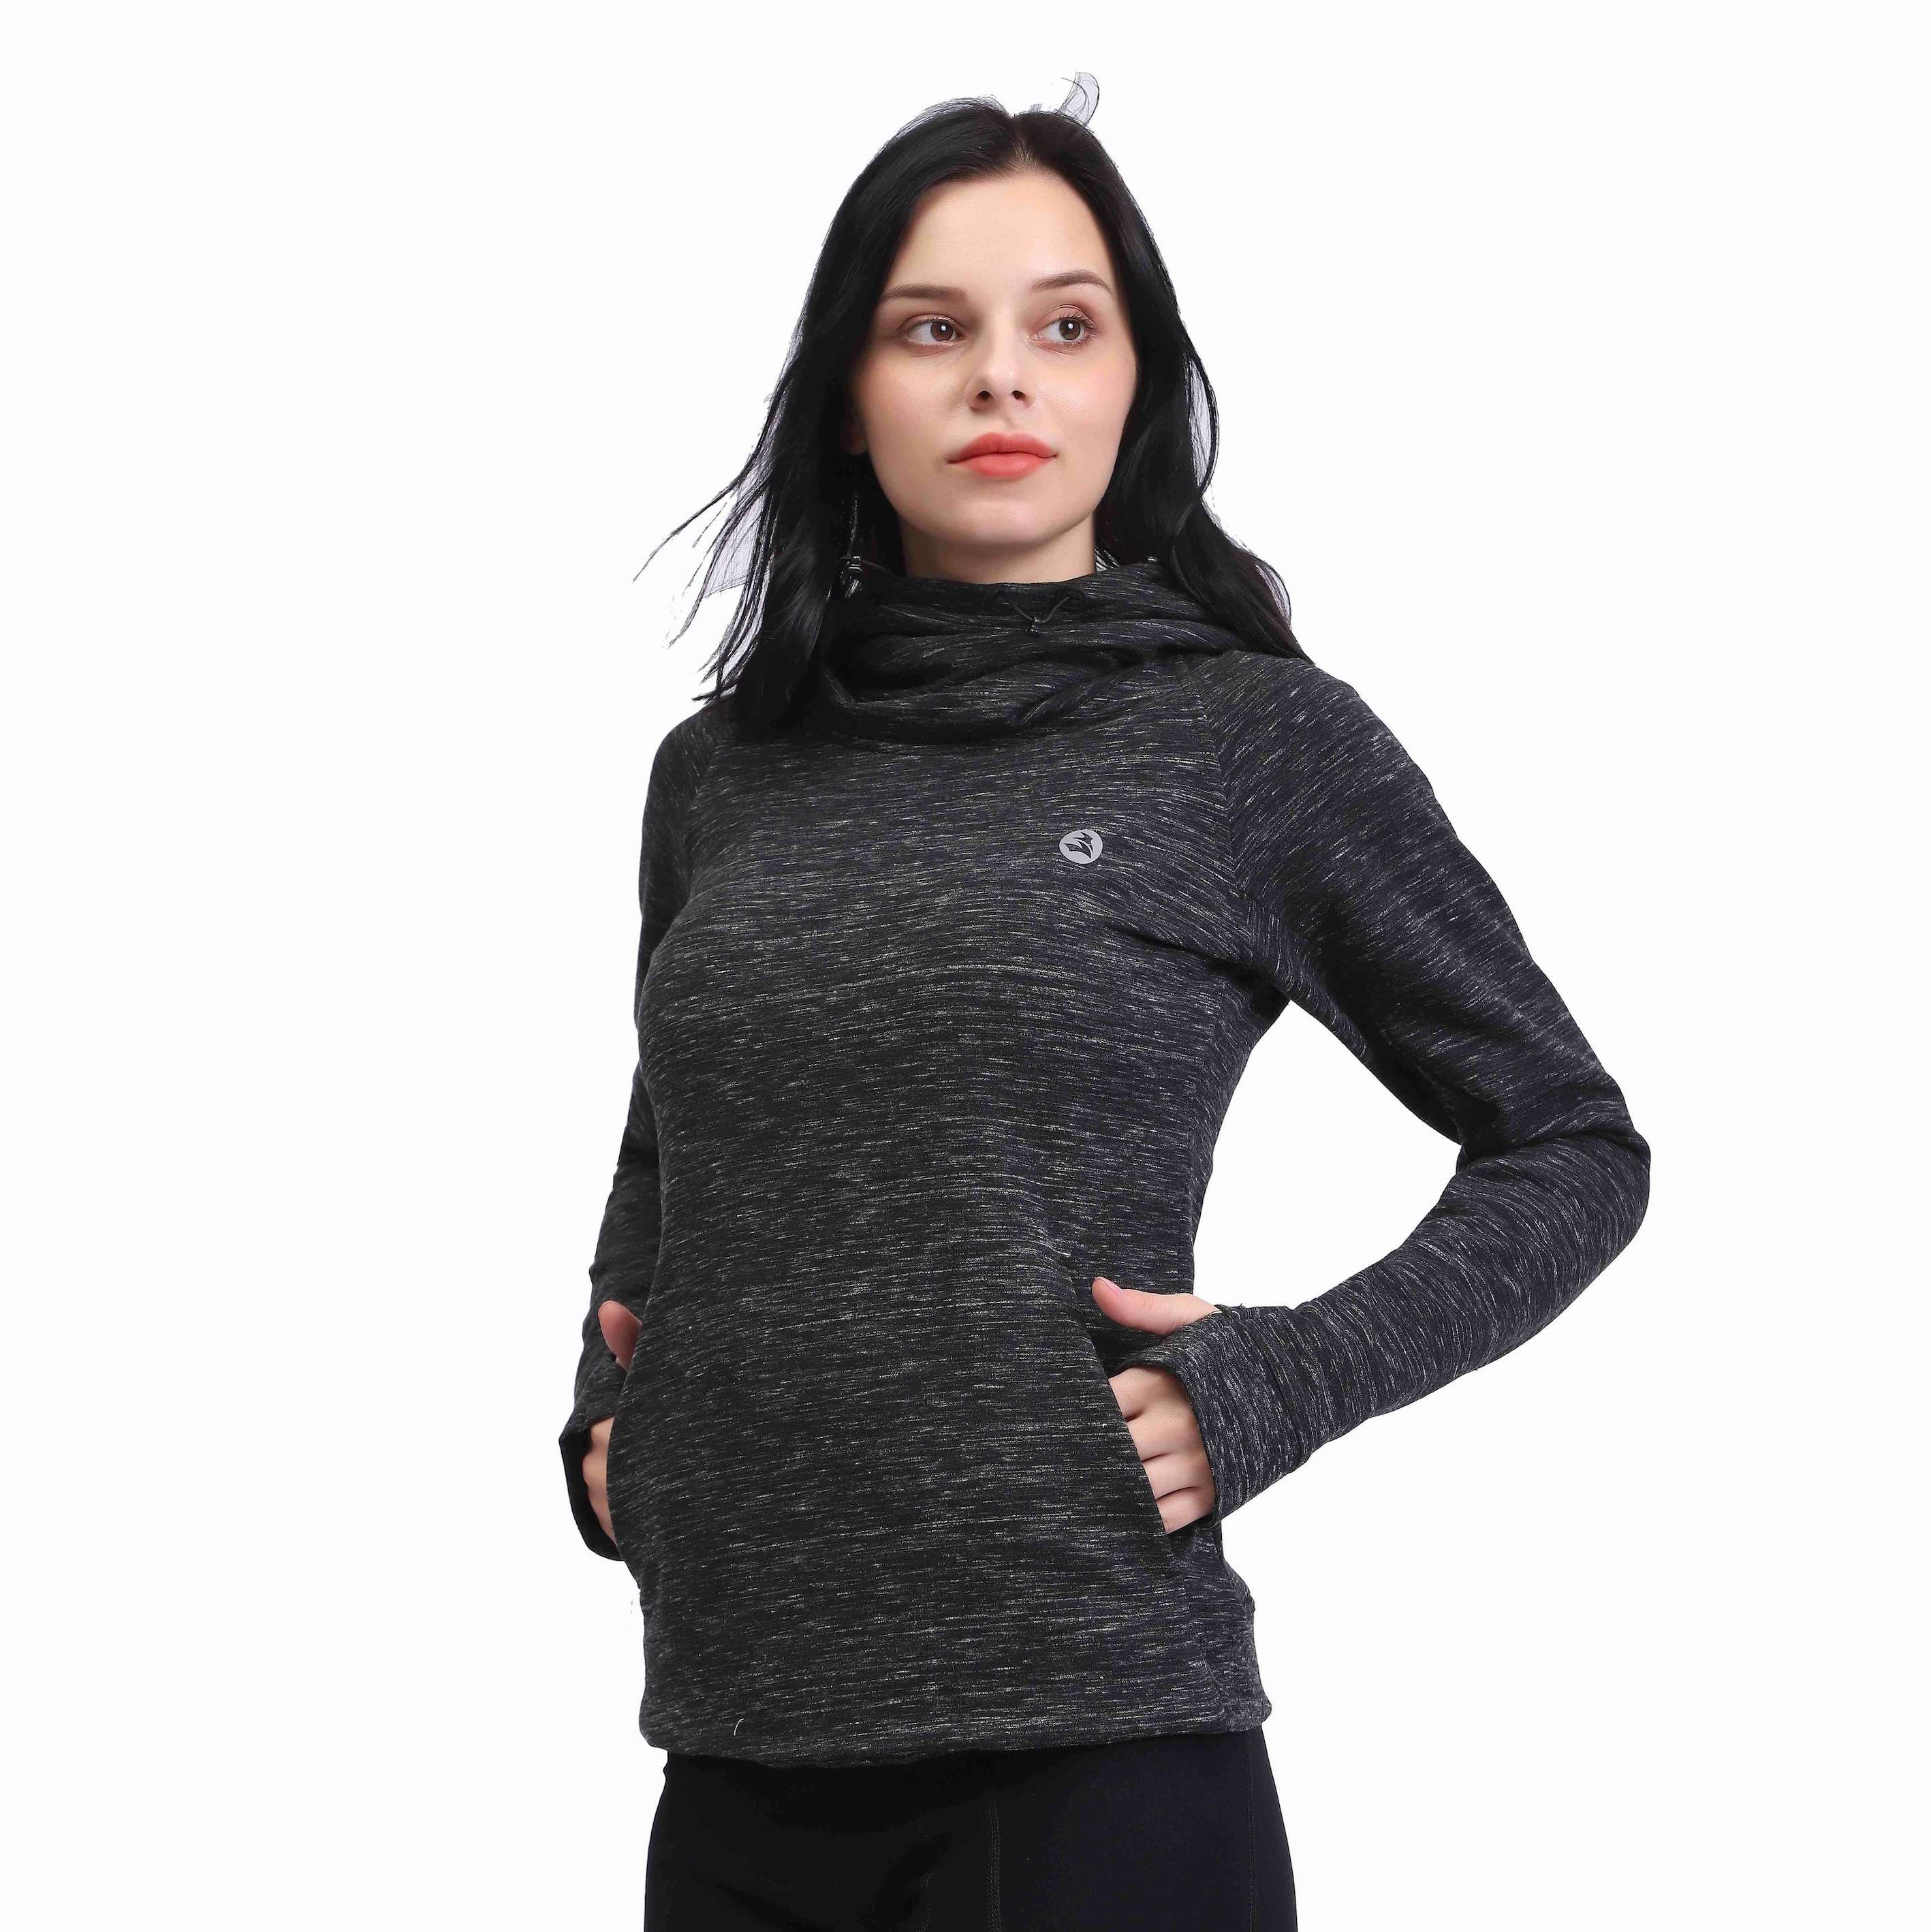 Women Cowl Neck Pullover Sweatshirts with Thumb Holes